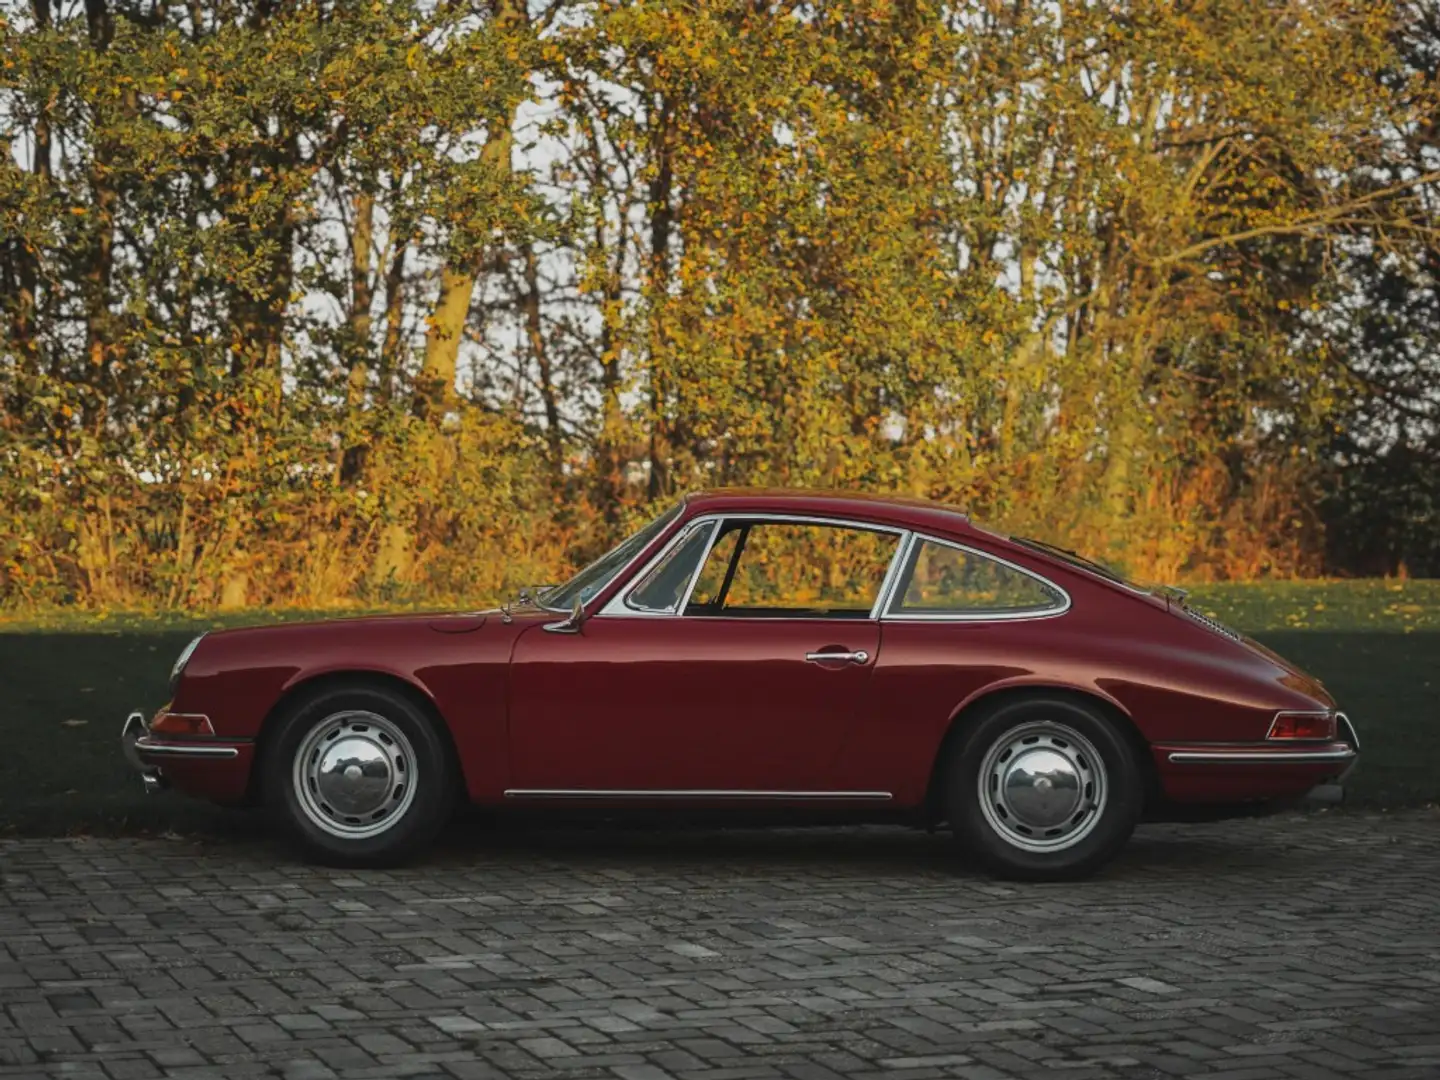 Porsche 911 1965 911 Coupe Matching numbers early chassis numb Roşu - 2